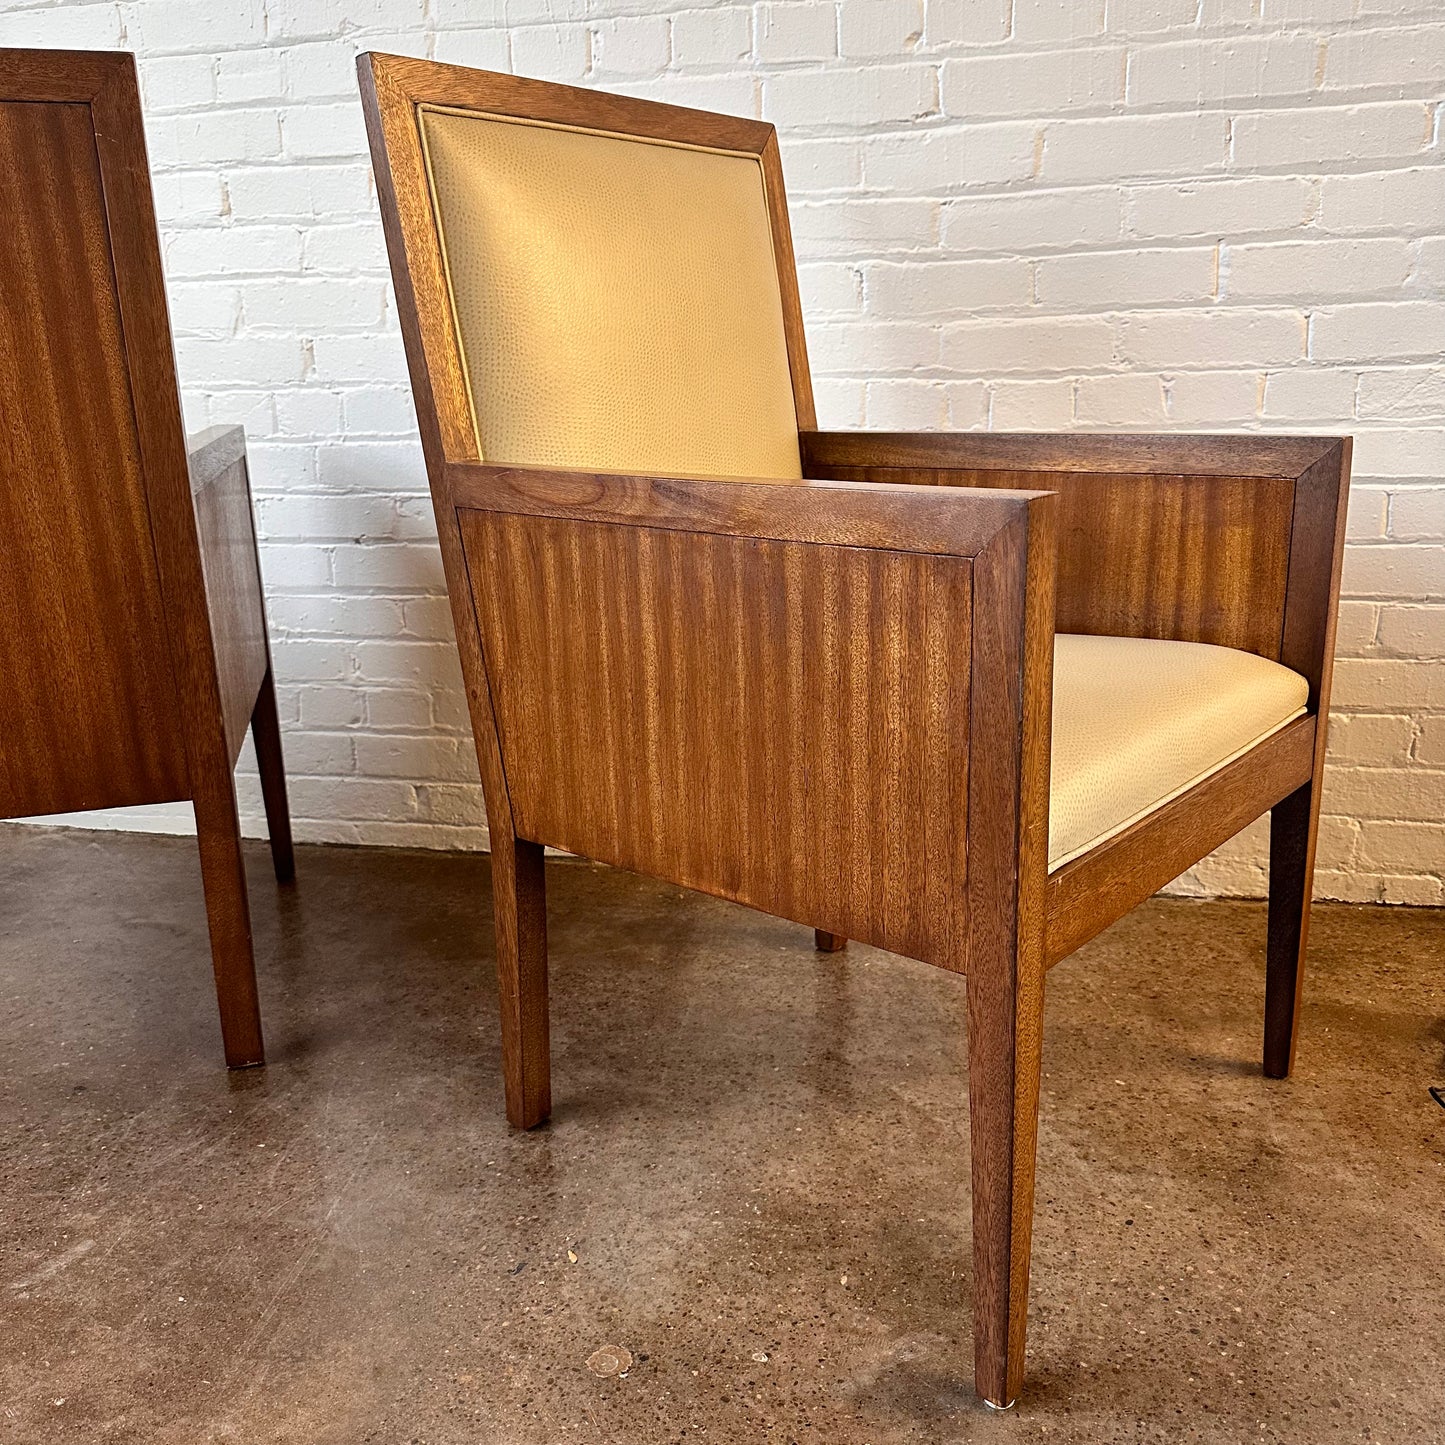 PAIR OF RIBBON MAHOGANY WOOD CHAIRS W/ FAUX OSTRICH SKIN